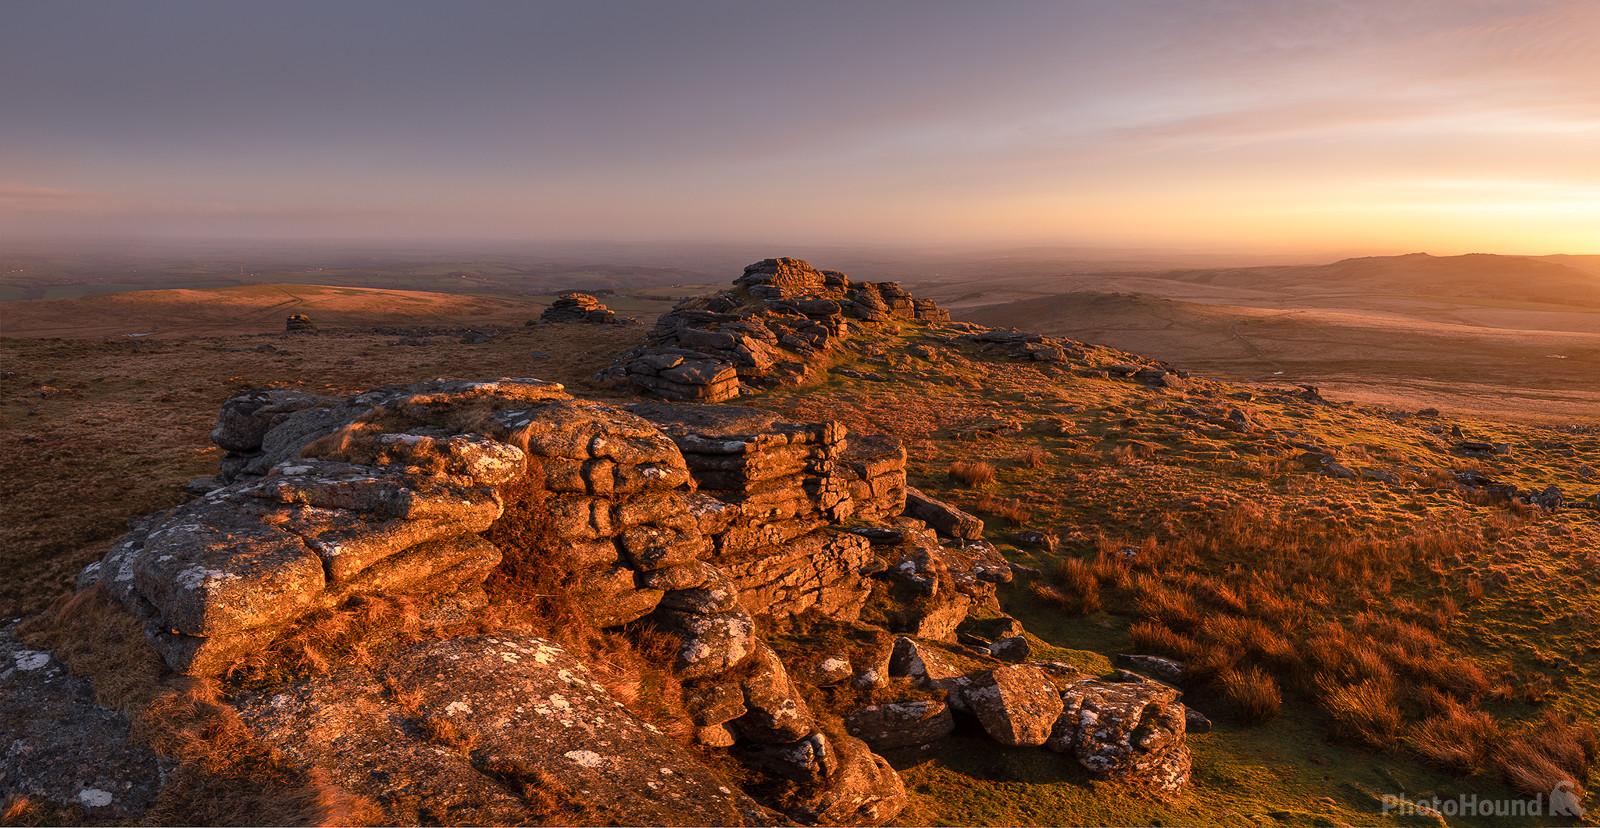 Image of West Mill Tor by Richard Fox